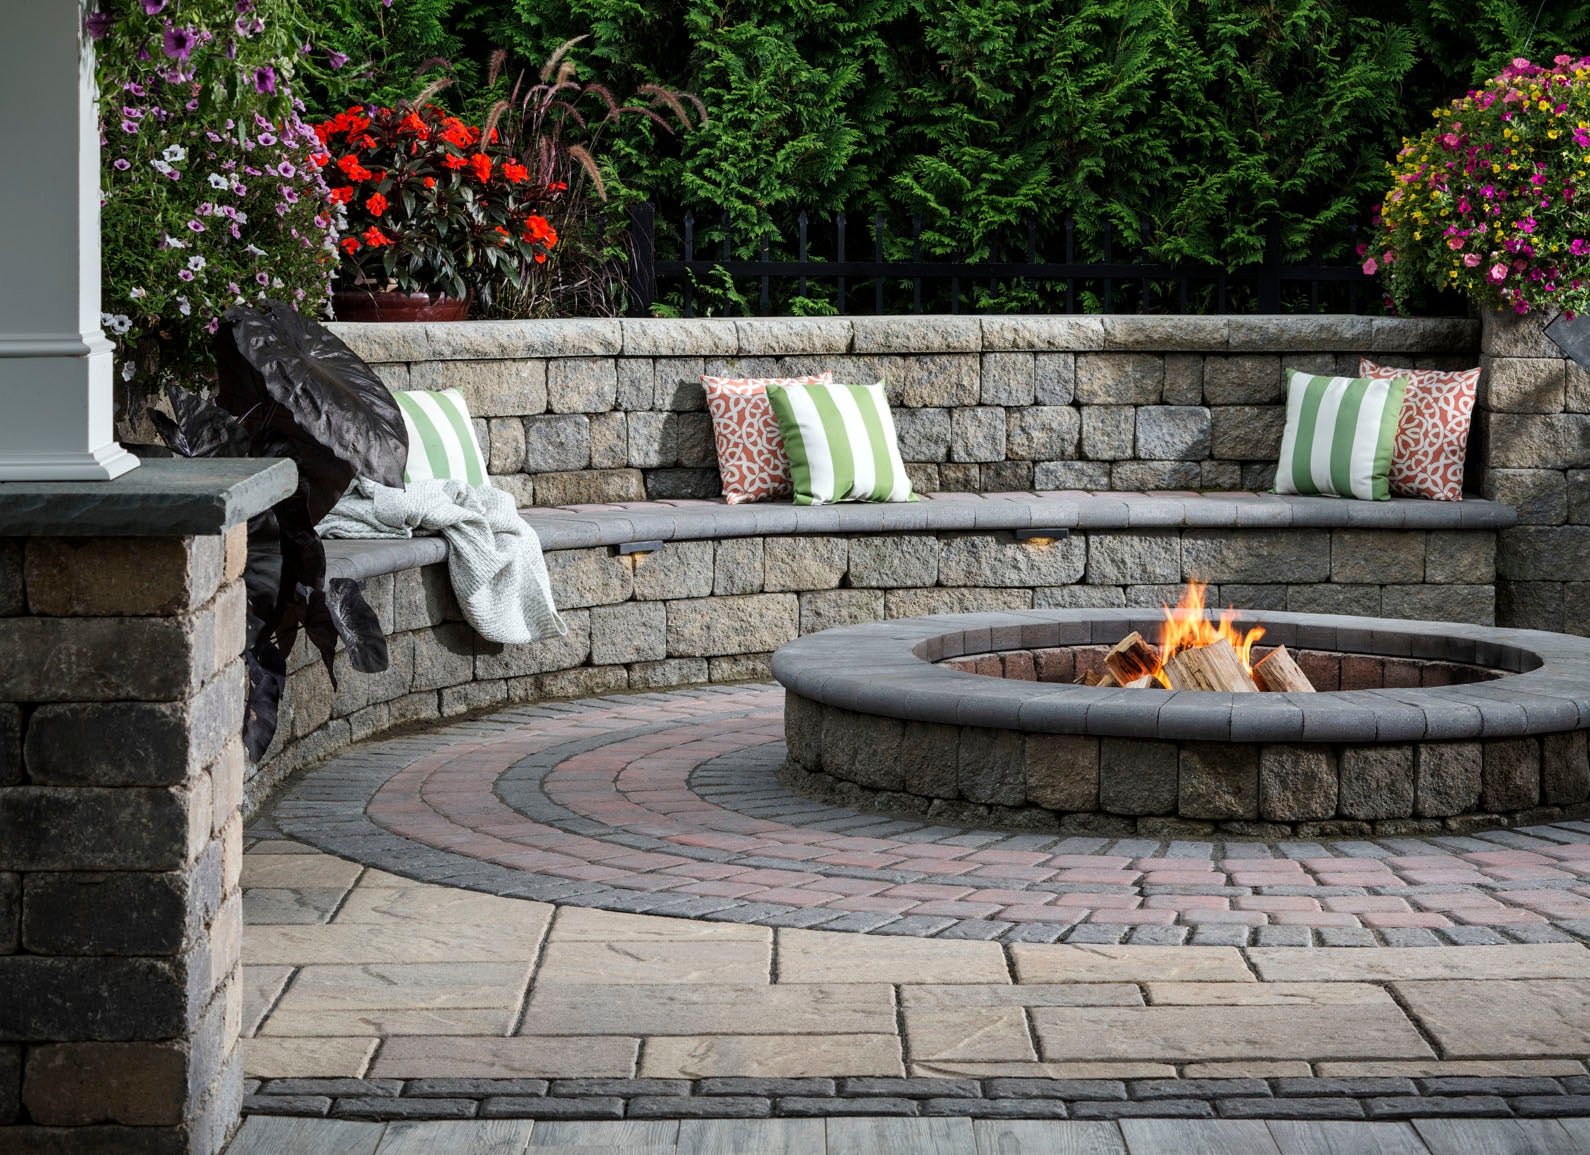 Designing A Patio Around Fire Pit, How Big Should The Area Around A Fire Pit Be